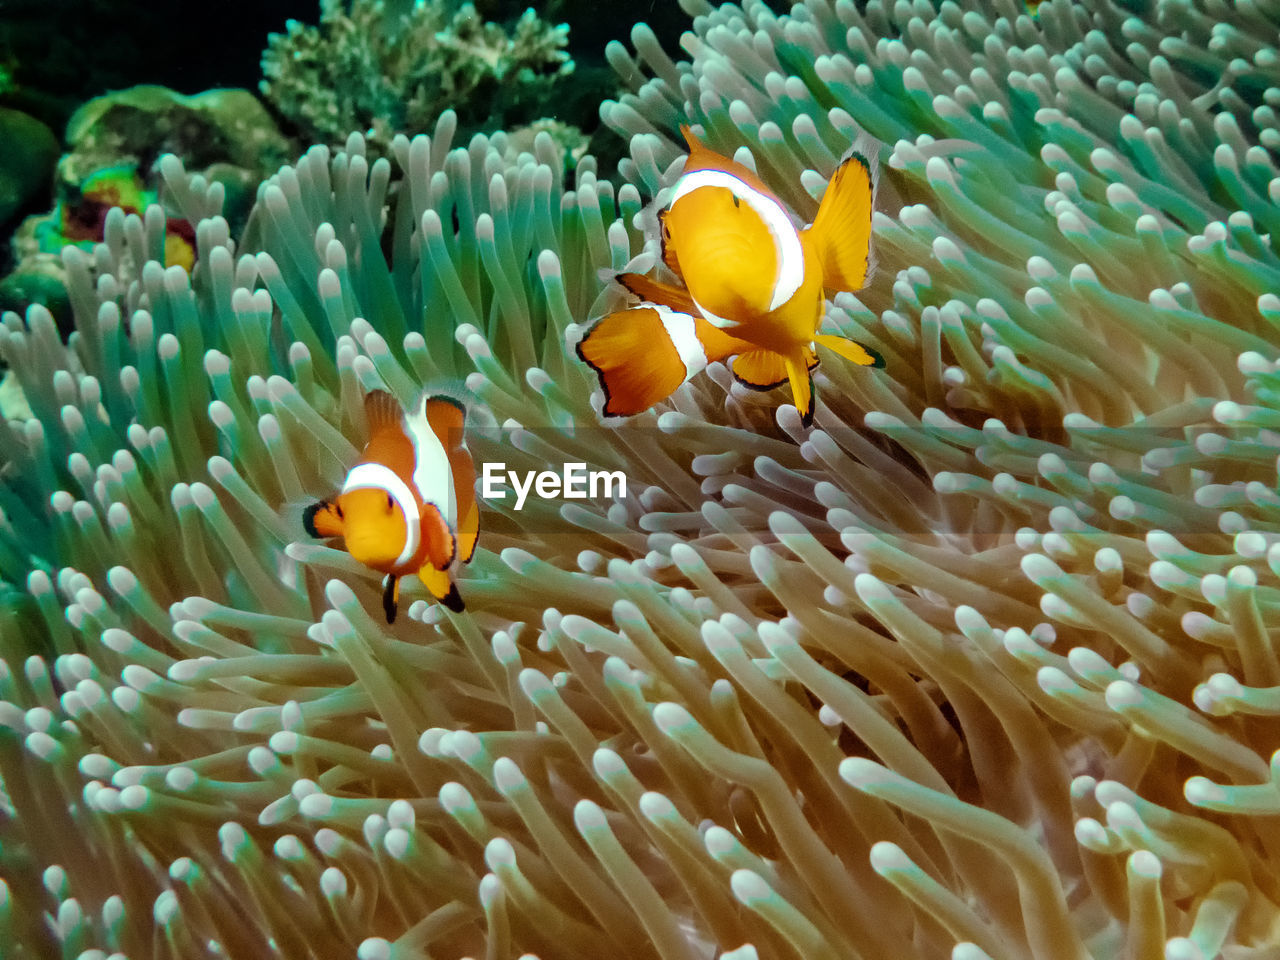 The common or false clownfish in an anemone in el nido, palawan